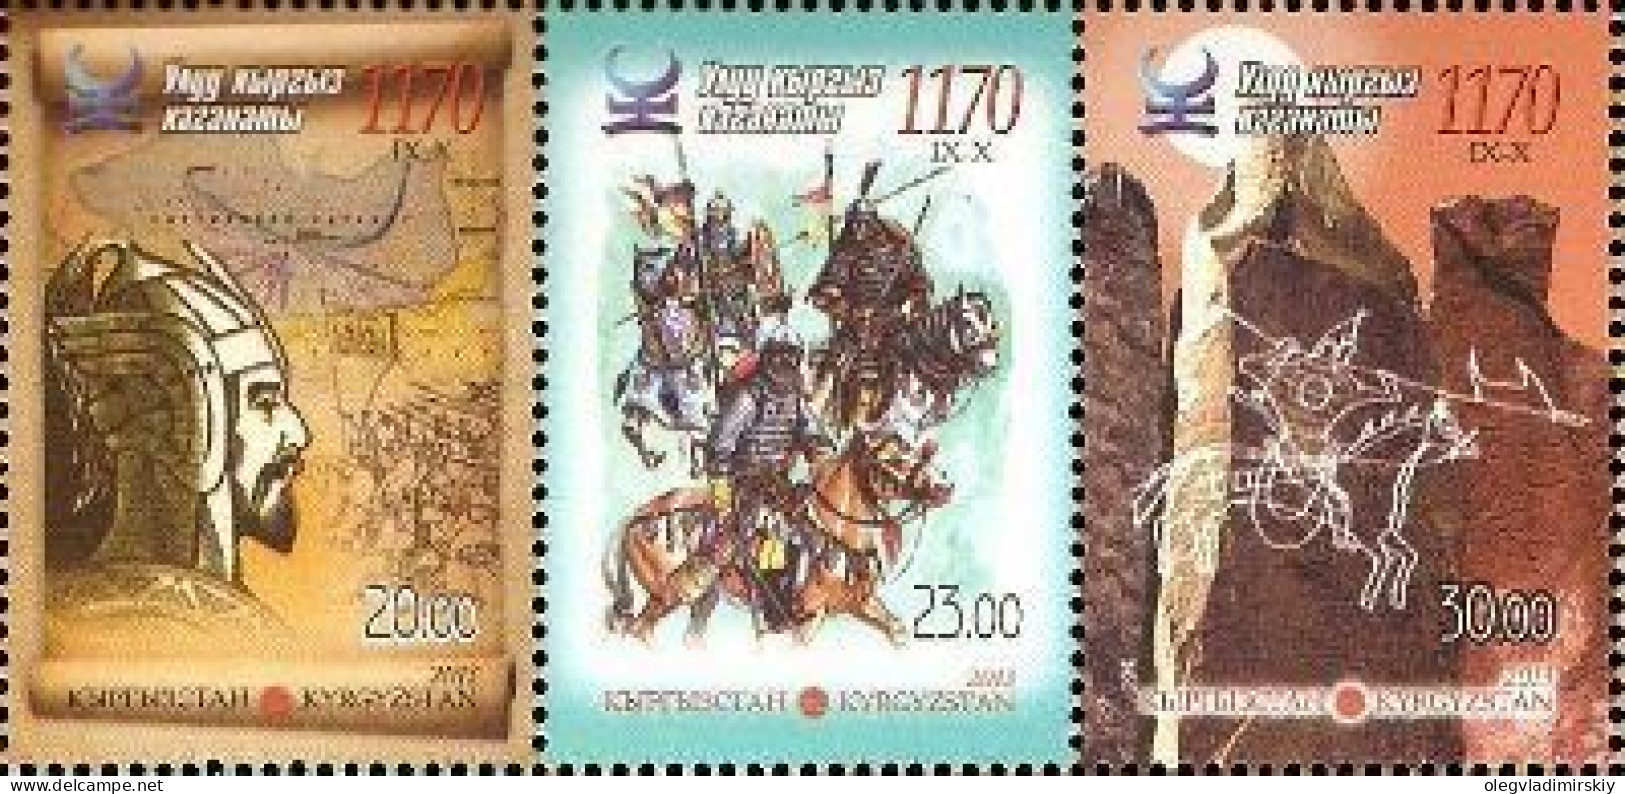 Kyrgyzstan 2013 Great Kyrgyz Kaganate 1170 Years Set Of 3 Stamps In Strip MNH - Kirghizistan